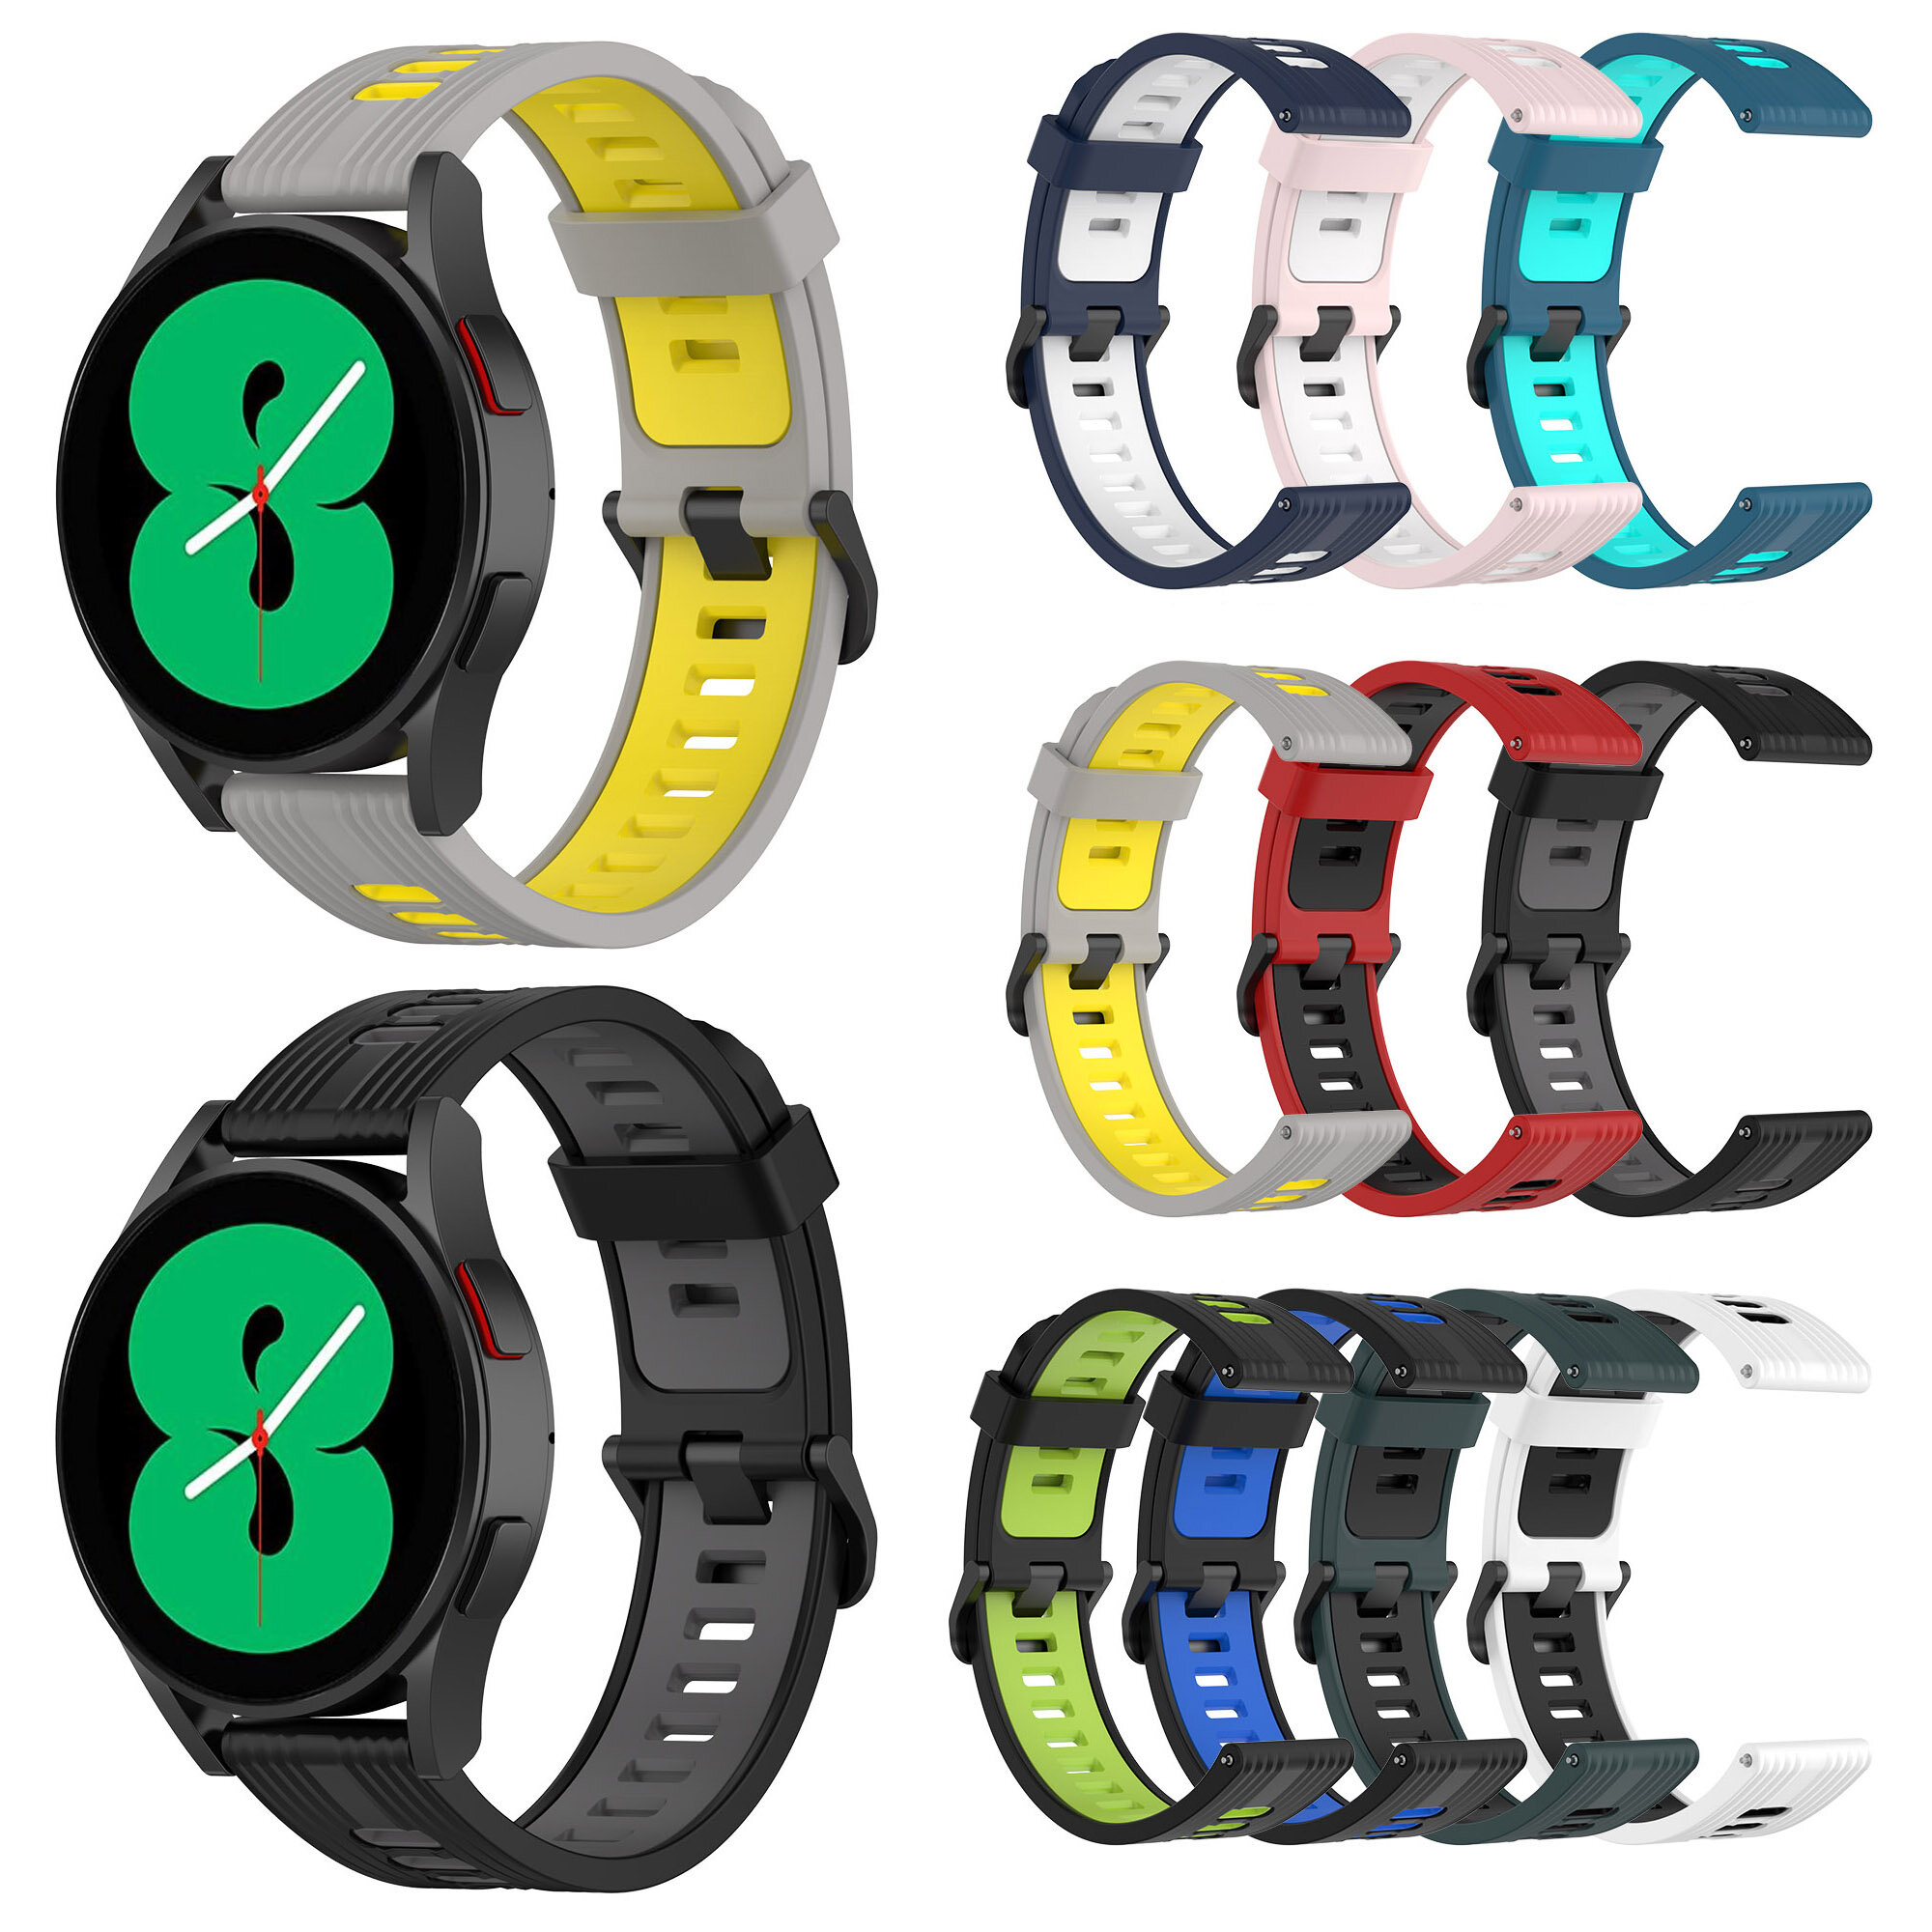 

Bakeey 20mm Width Comfortable Breathable Sweatproof Soft Silicone Watch Band Strap Replacement for Samsung Galaxy Watch